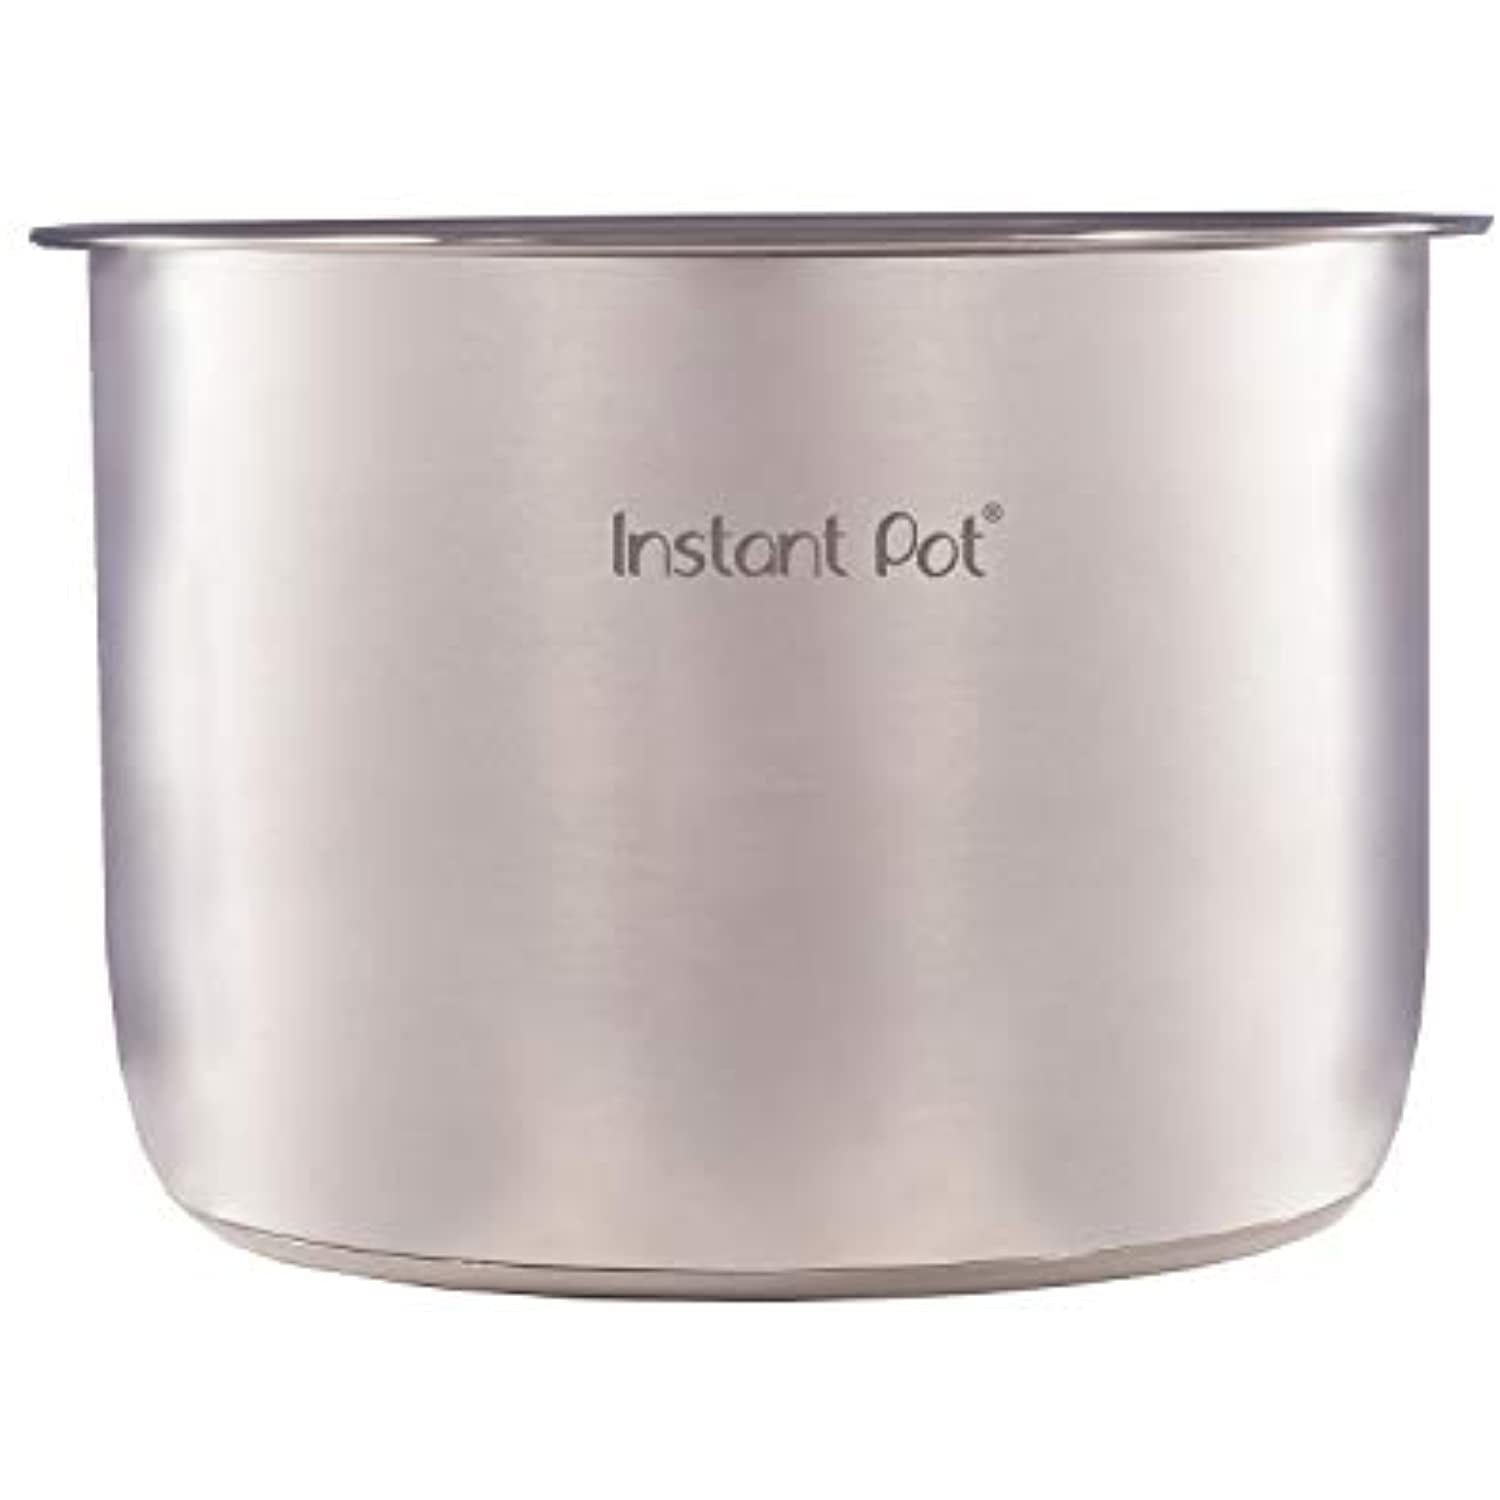 Instant Pot Stainless Steel Inner Cooking Pot with Handles – Use with 8 Quart Duo Evo, Pro, and Pro Crisp